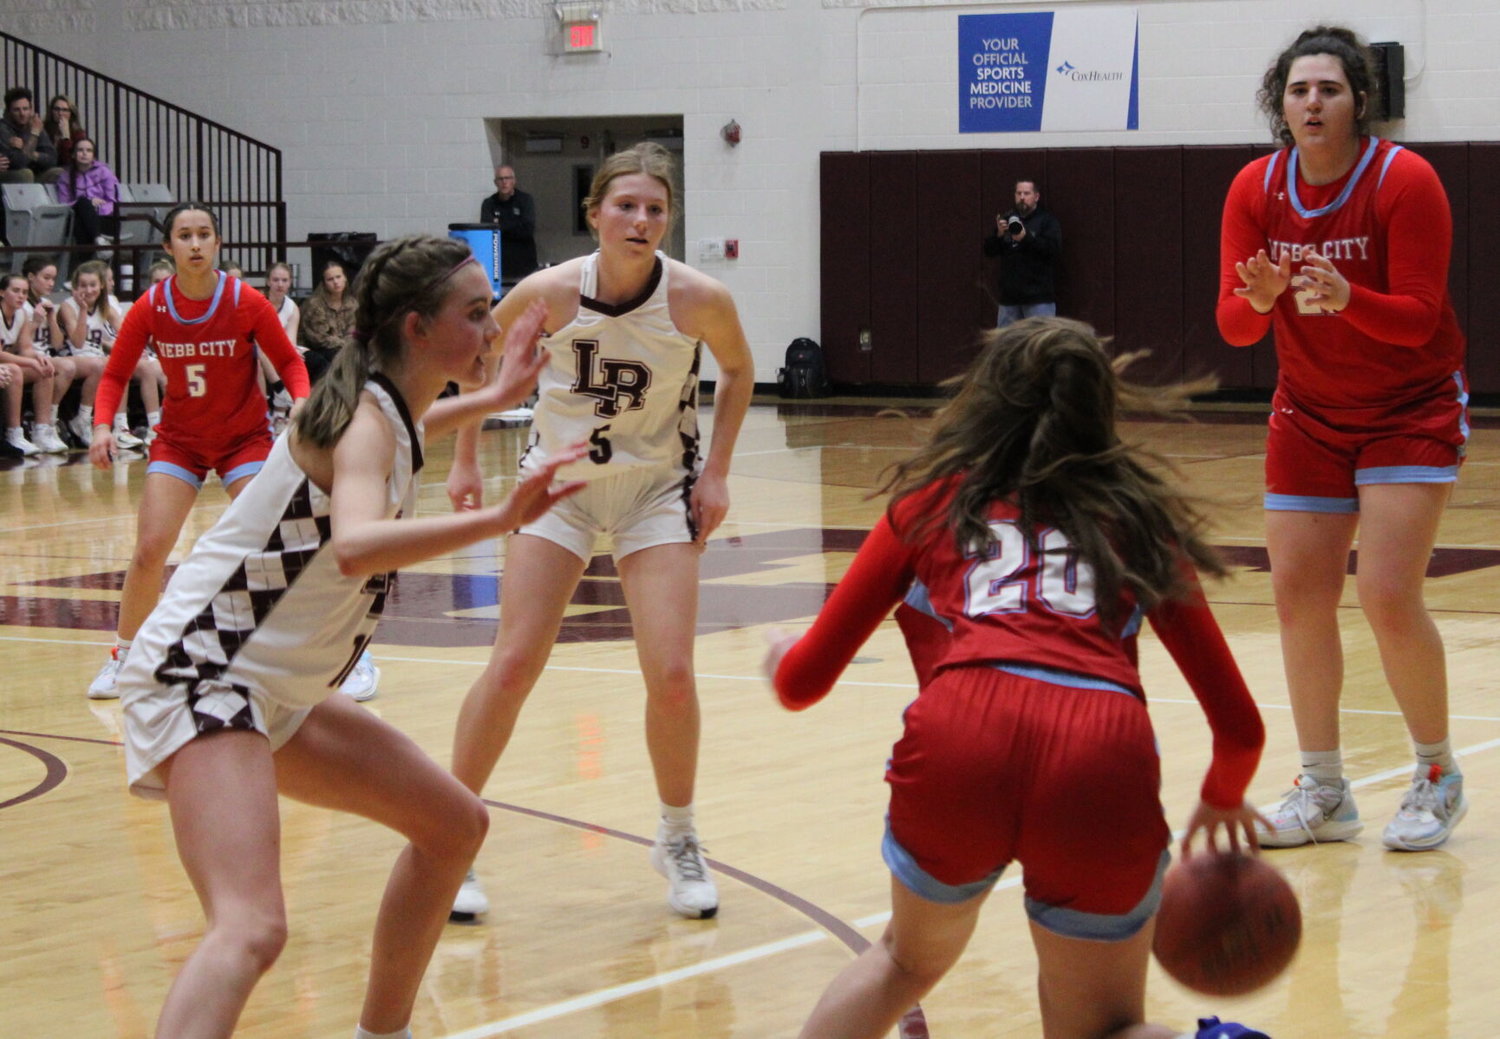 Playing defence are Freshmens Hailey Buckman and Sydney Prenger against Webb City. L-R would end up losing the game with the final score being 42-62. 